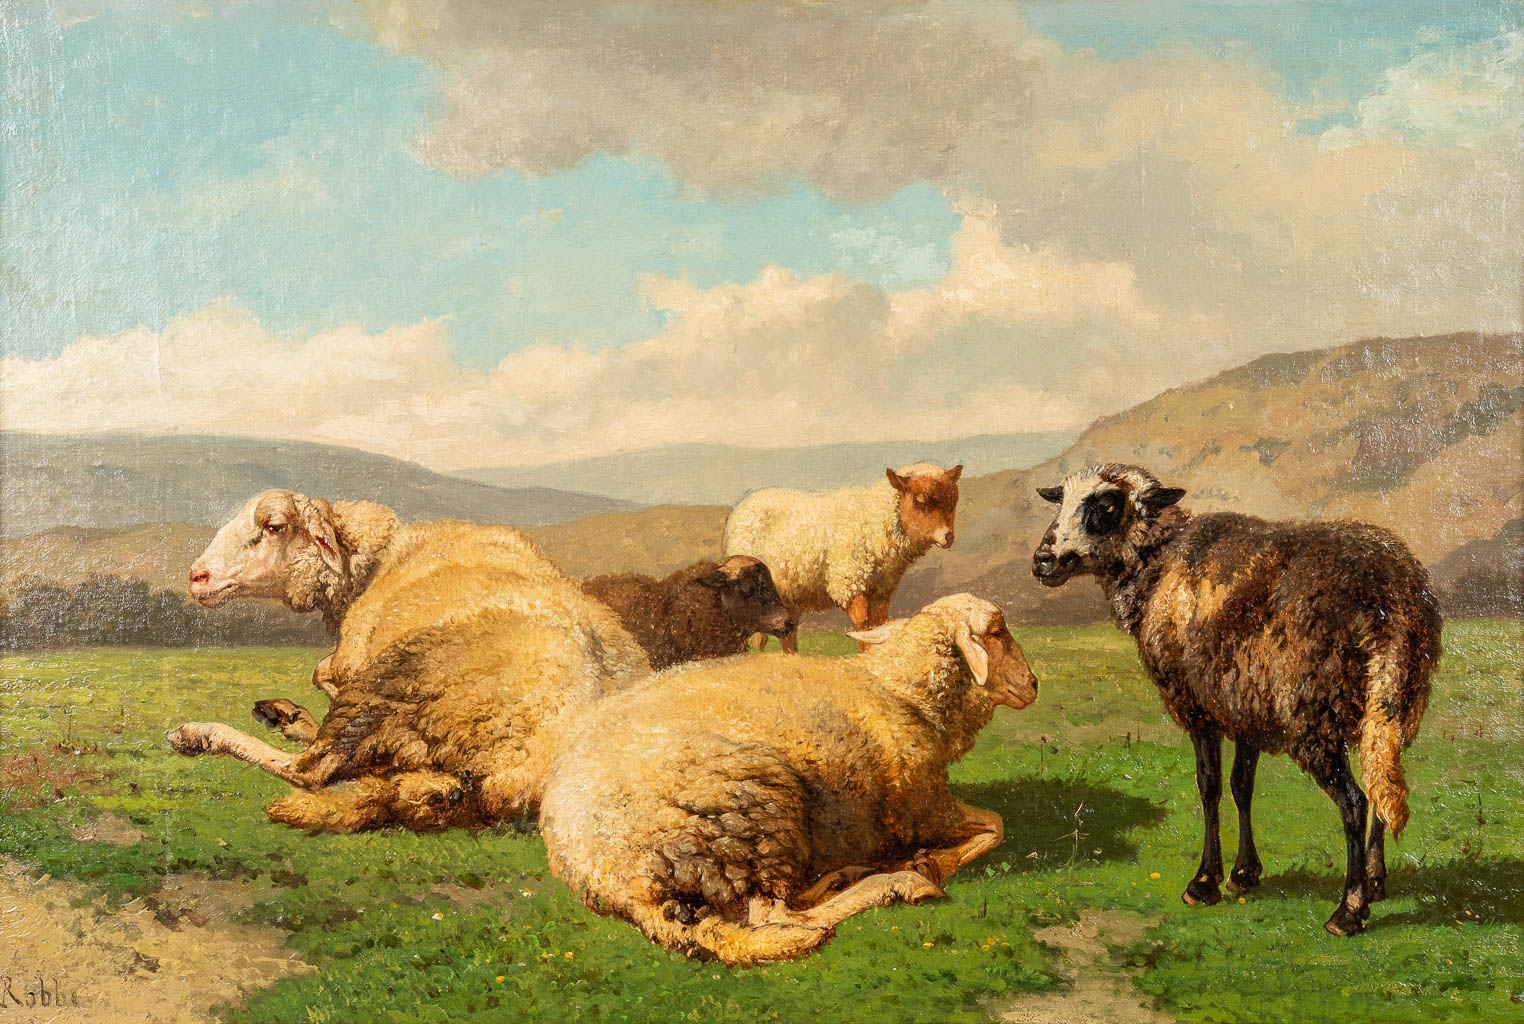  Louis ROBBE (1806-1887) 'The Black Sheep' a painting, oil on canvas. 